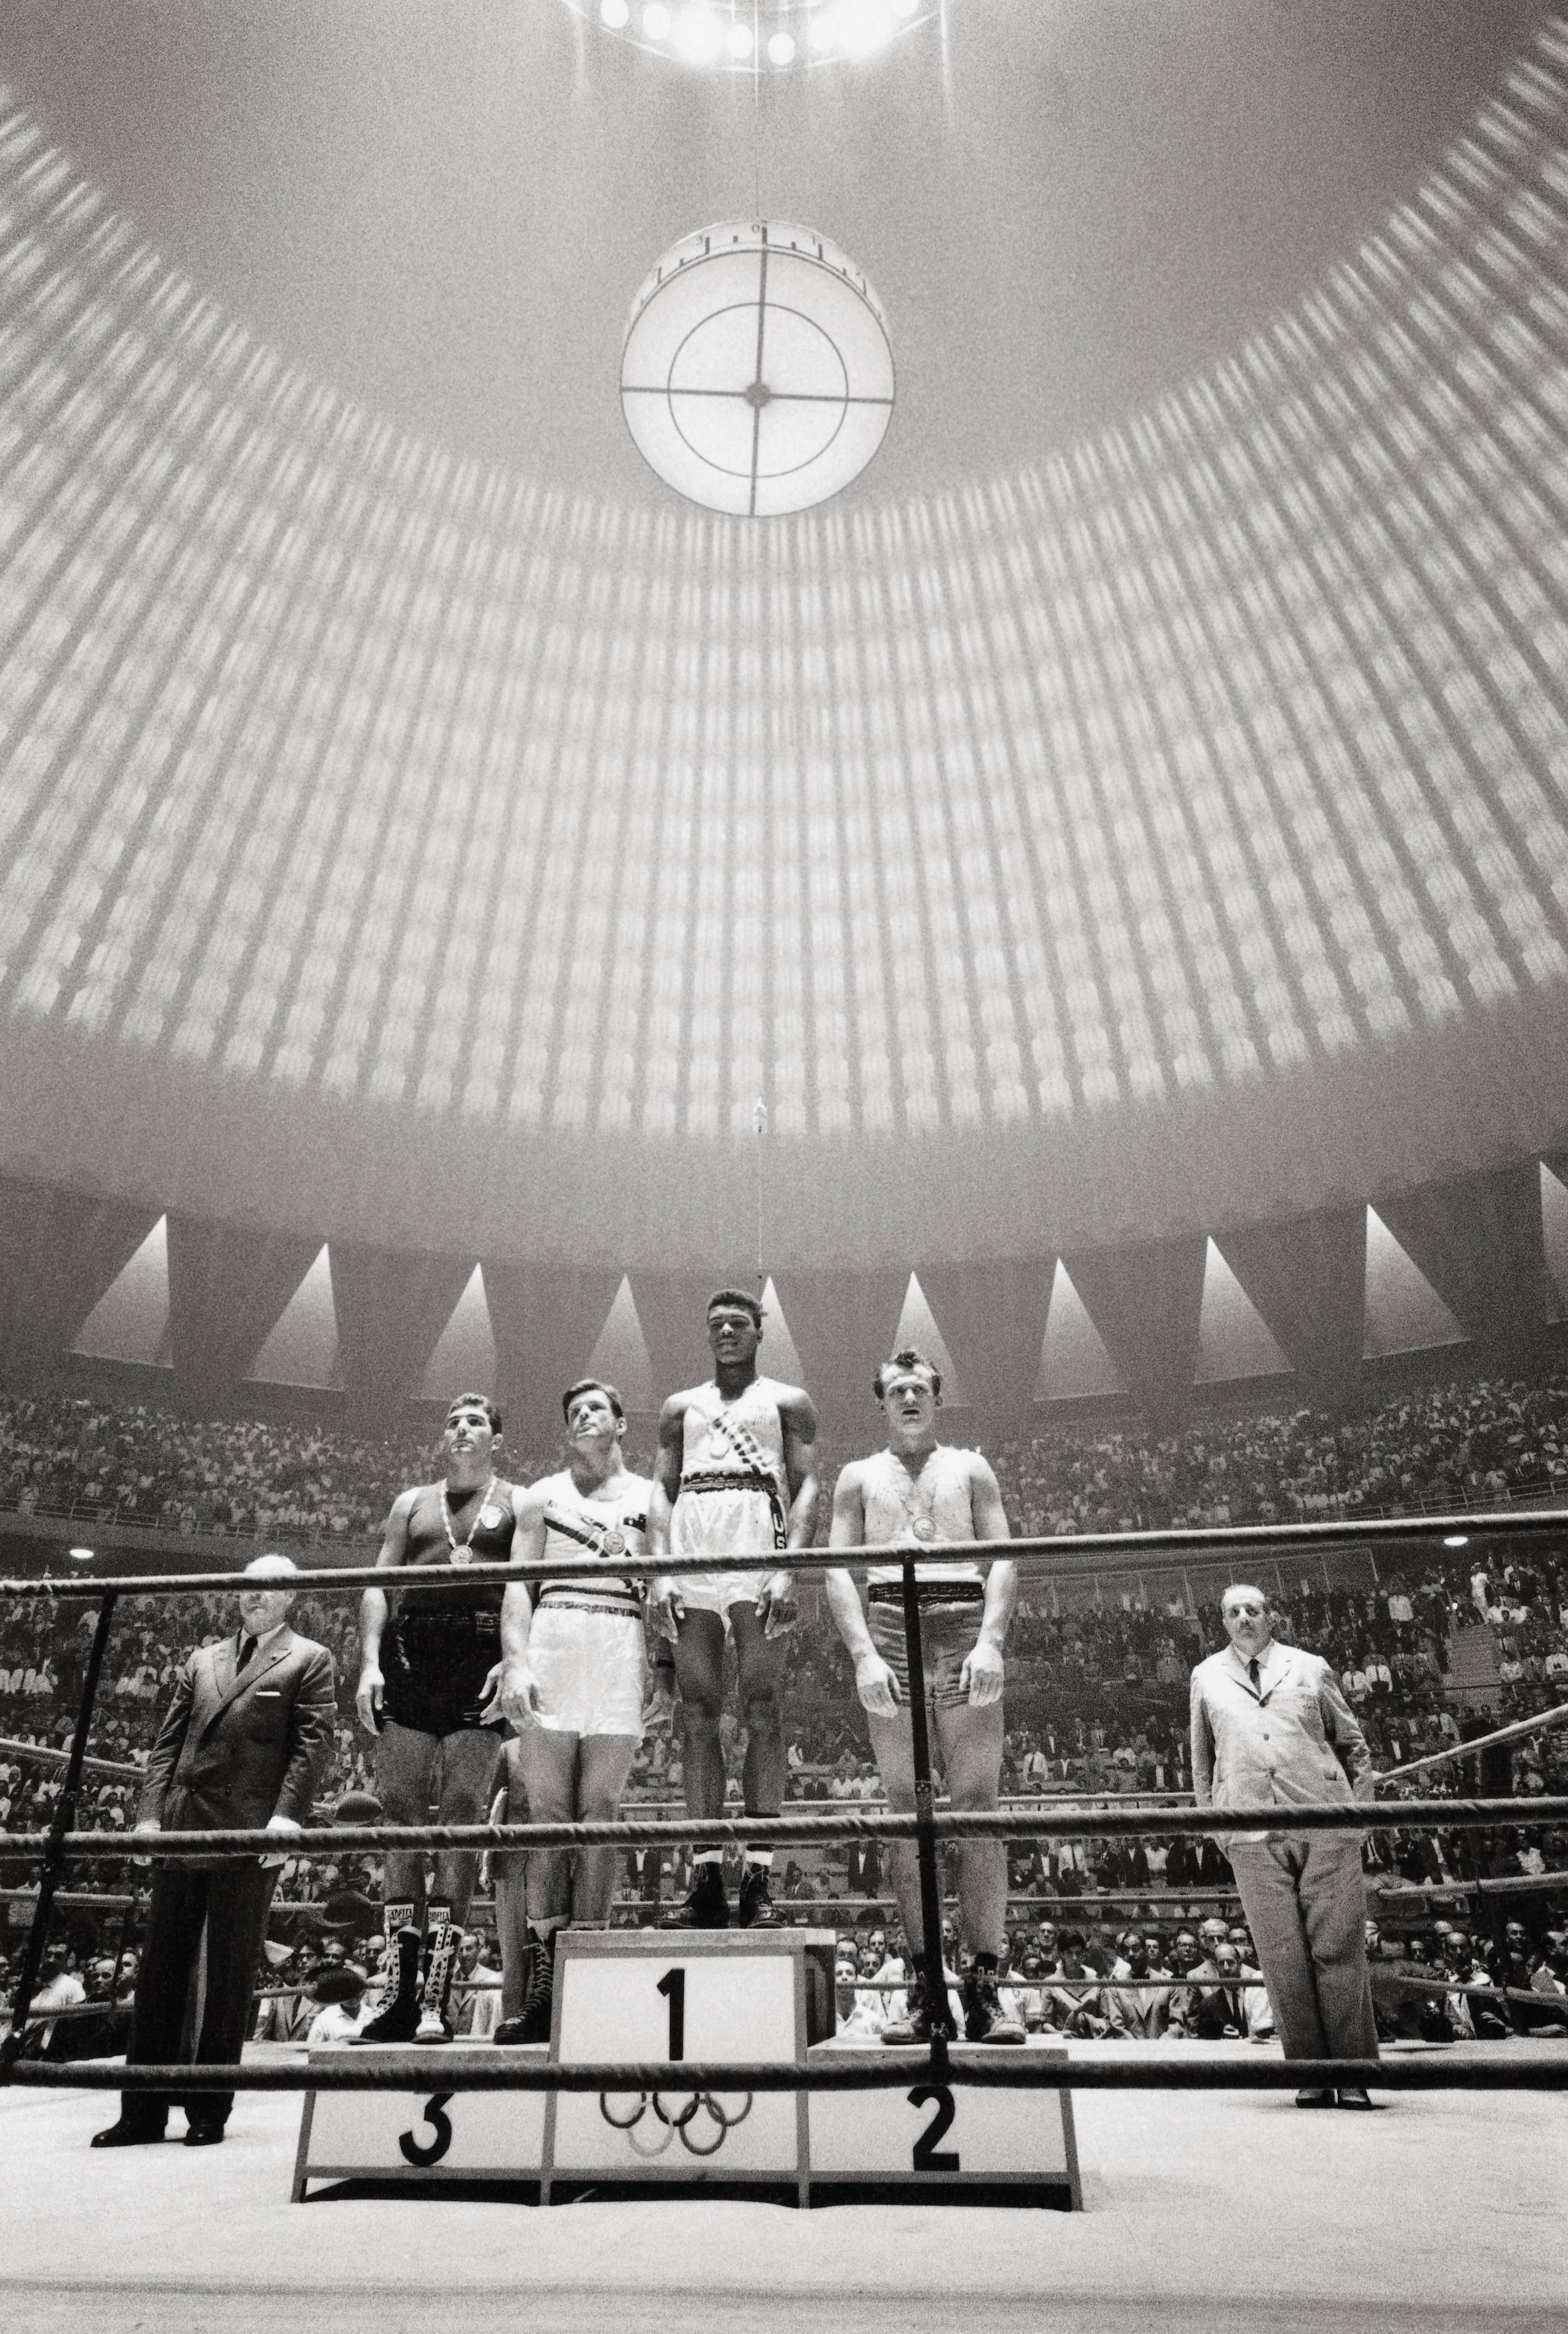 Marvin Newman Black and White Photograph - 1960 Rome Olympics, Cassius Clay, Black & White Photography, Fine Art Print